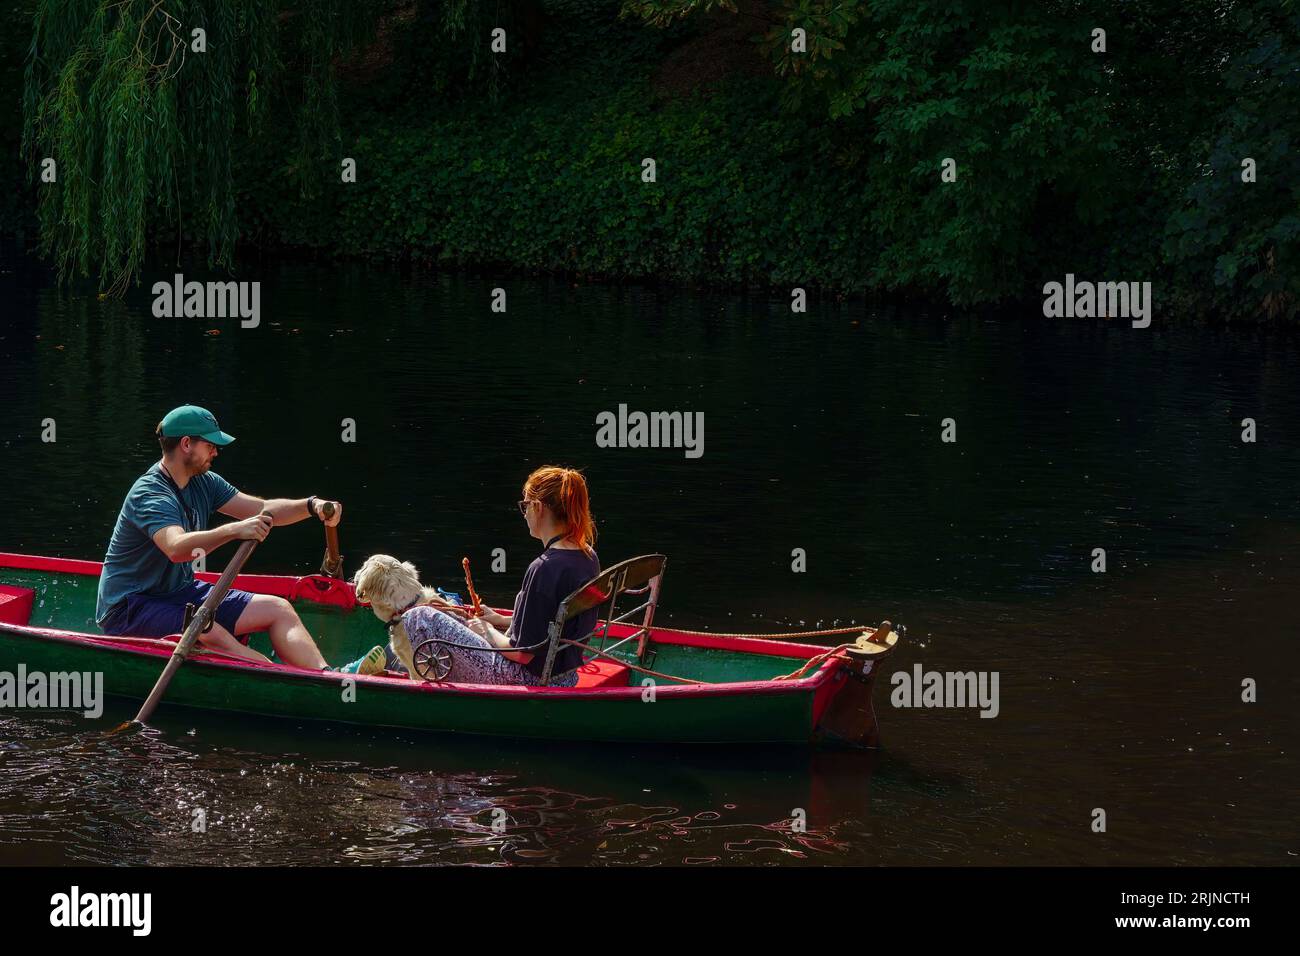 A sunlit couple and their white dog can be seen rowing  in red and green boat down the River Nidd, Knaresborough, North Yorkshire, UK. Stock Photo